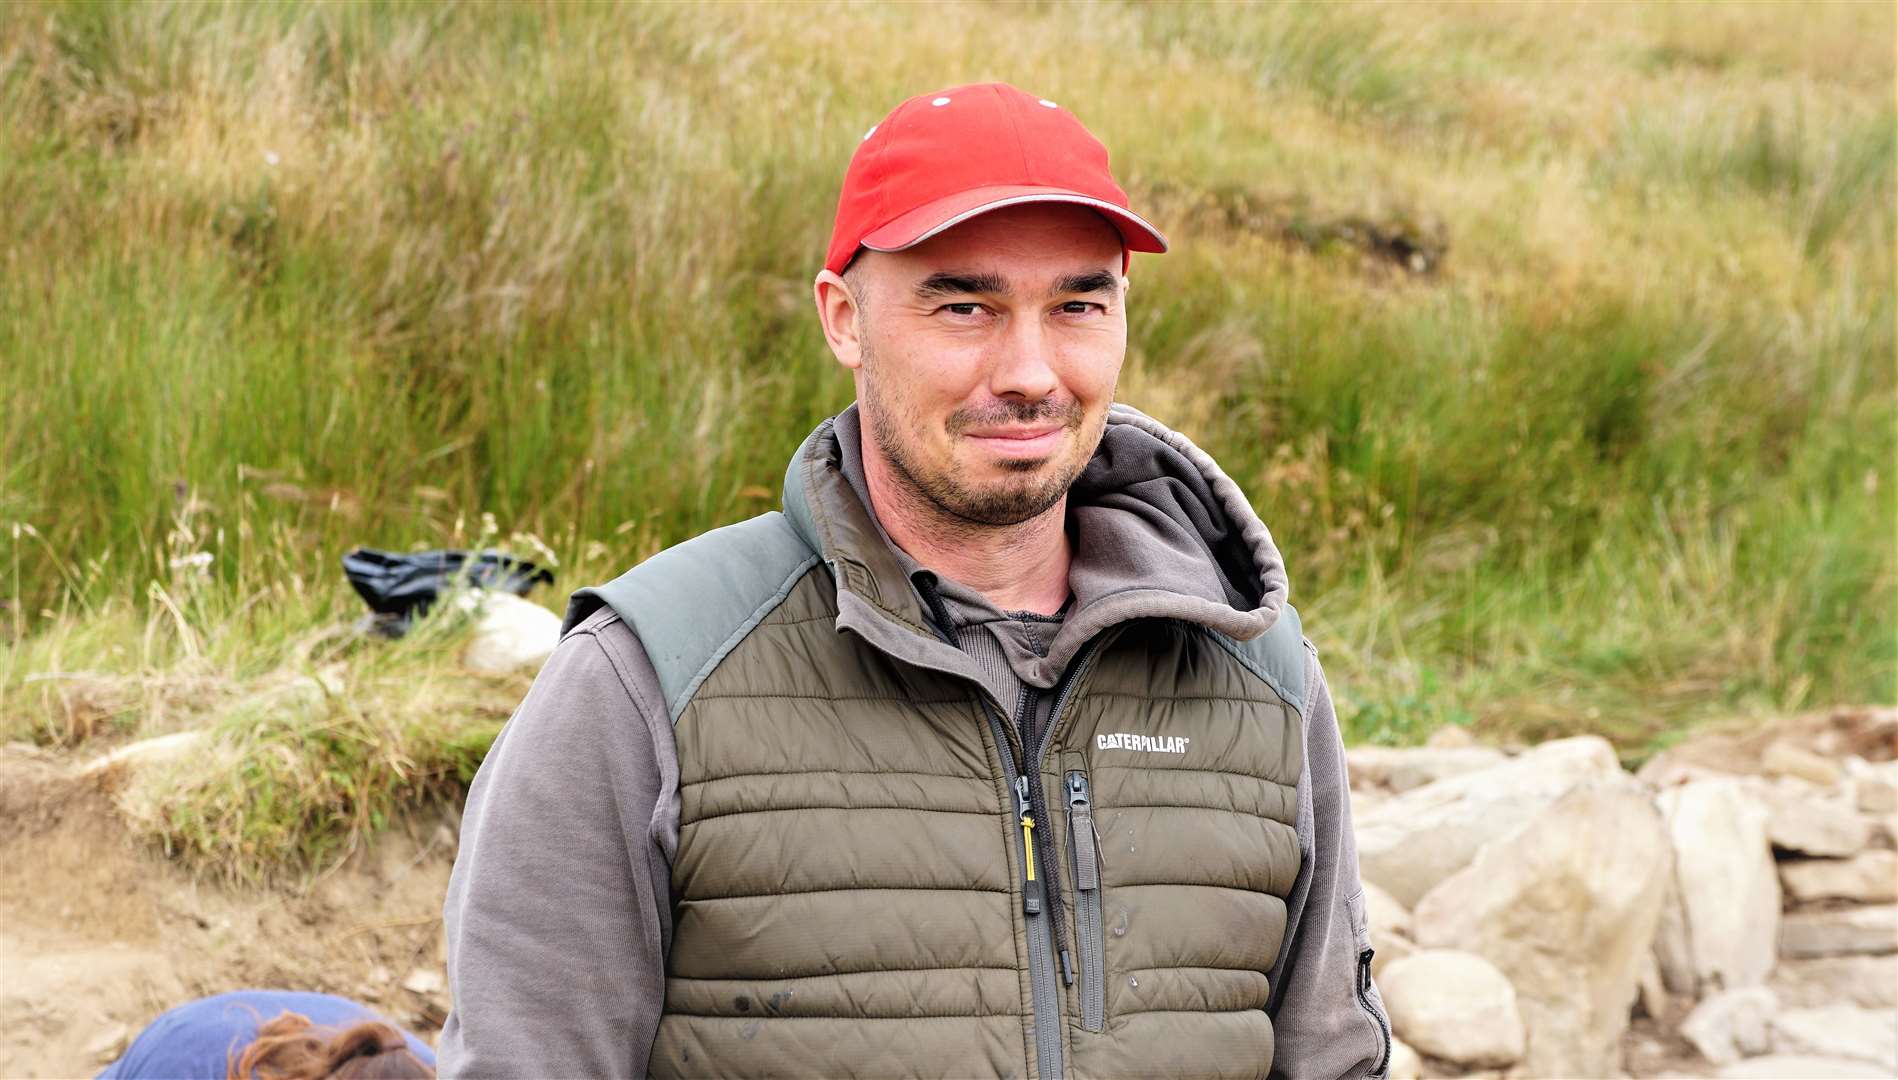 Rick Barton is project officer with the Orkney Research Centre for Archaeology (ORCA).